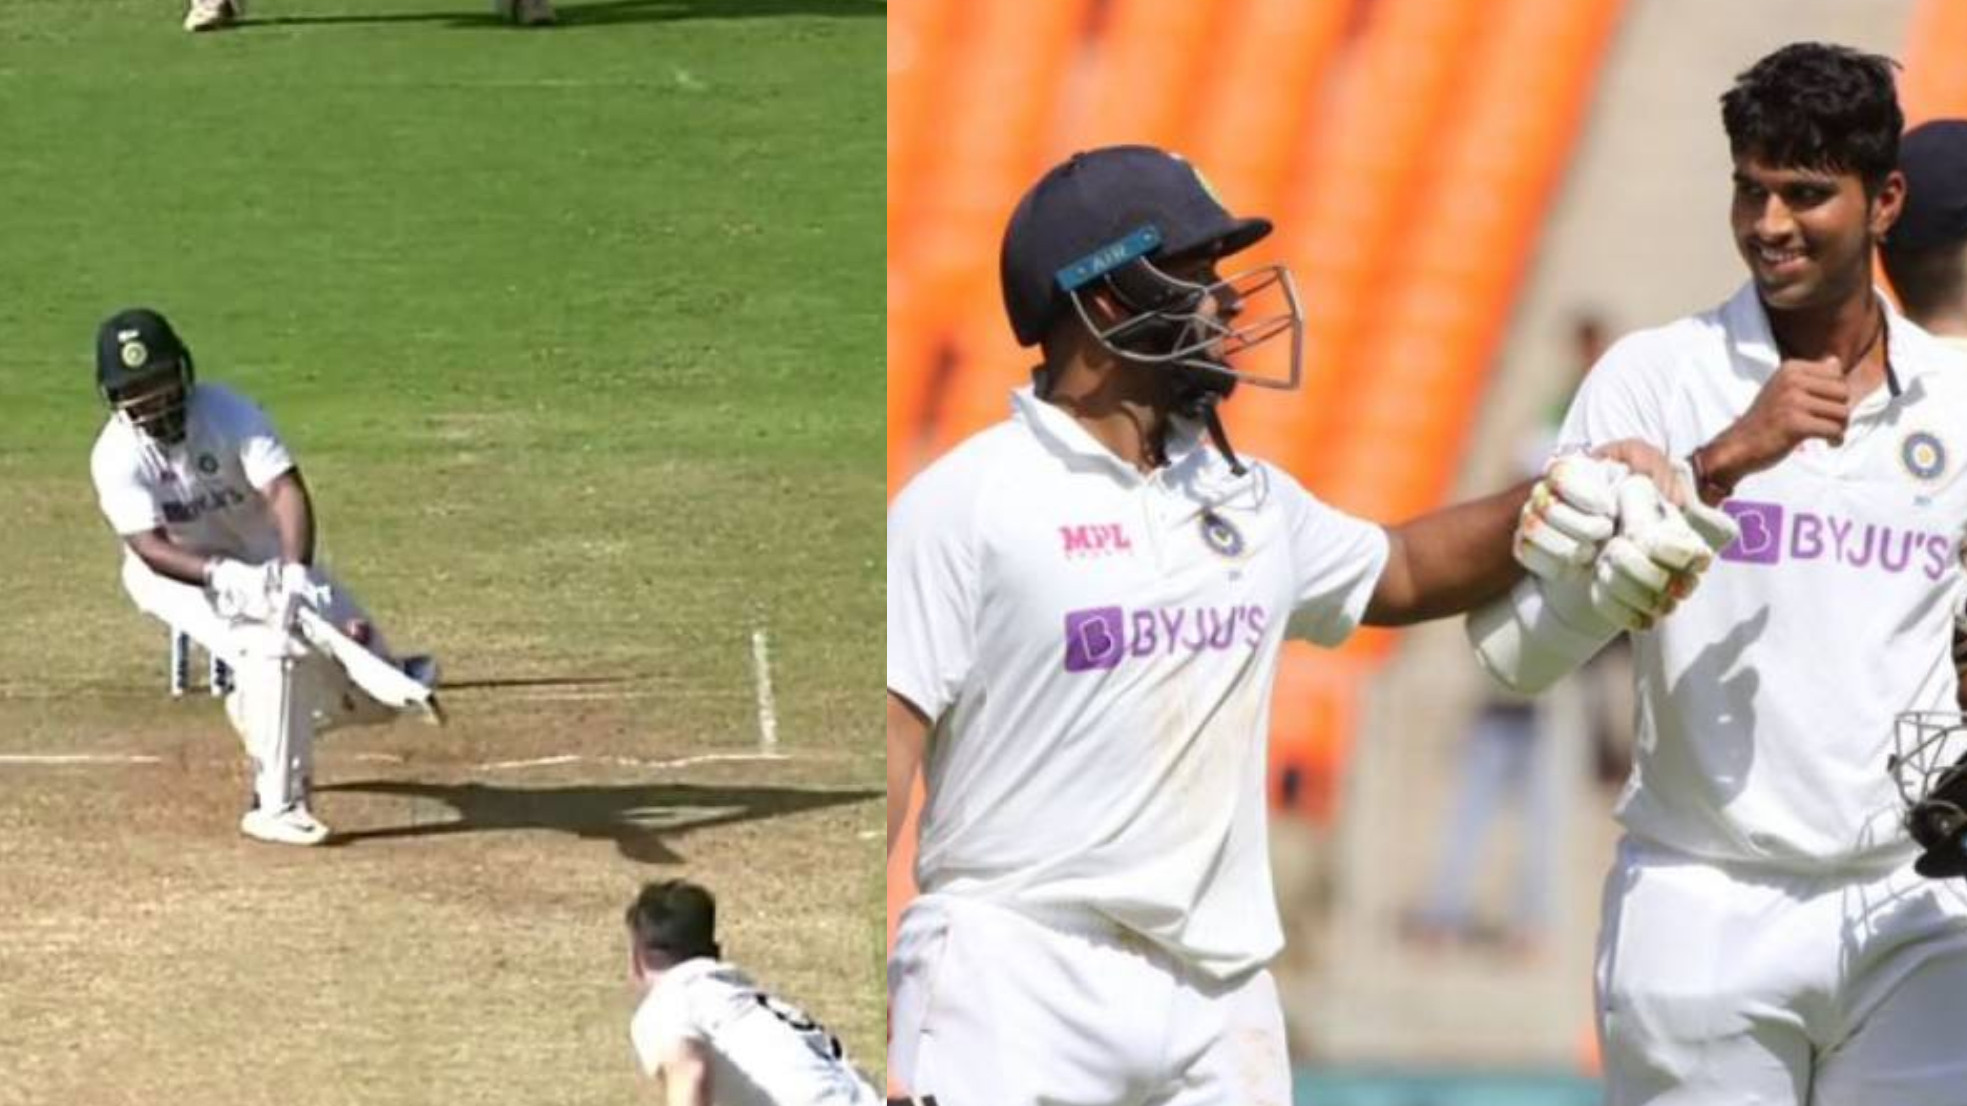 Sundar recalls Rishabh Pant's audacious reverse hit for six to Anderson while batting in 90s